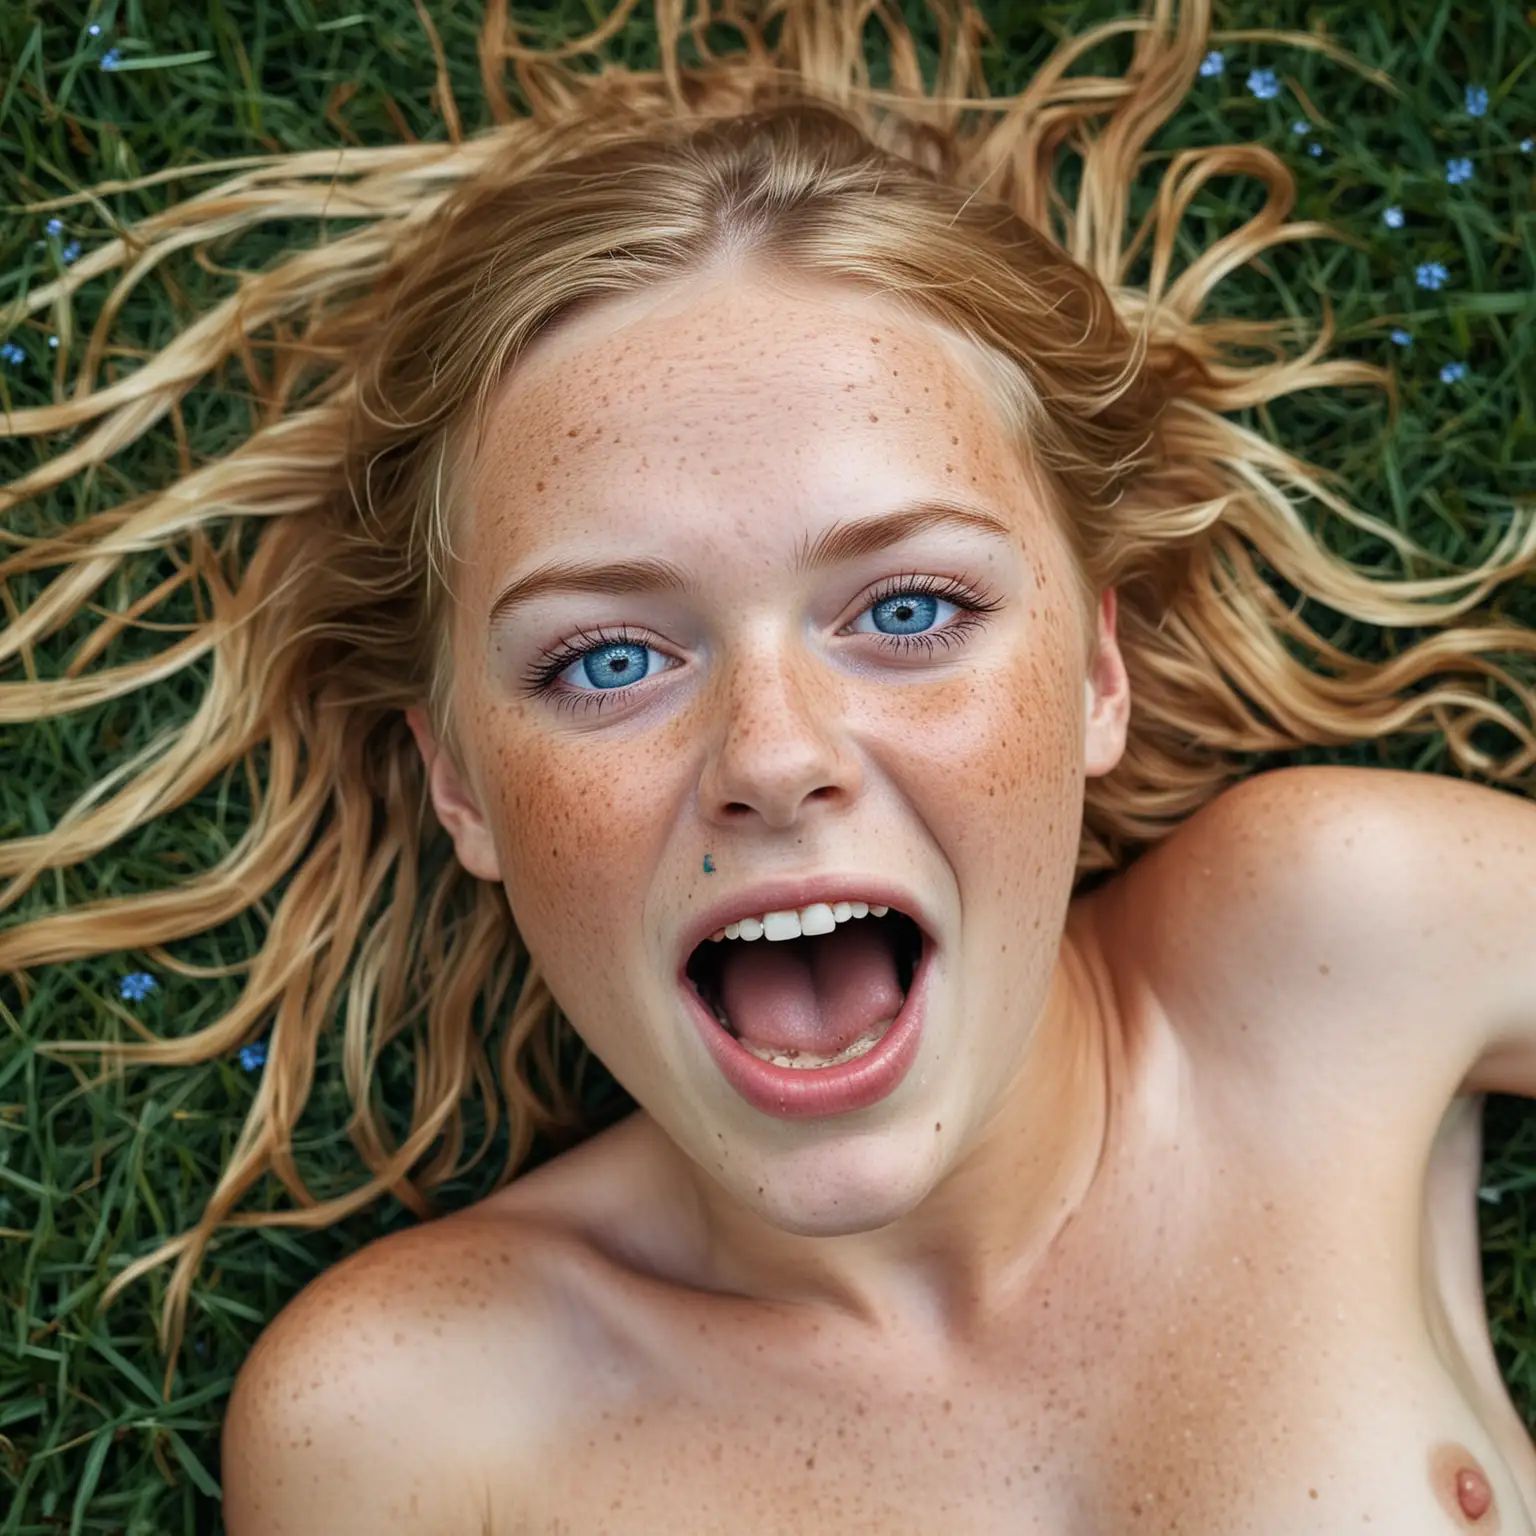 Frightened FreckleFaced Girl Lying in Grass Innocence and Fear Captured